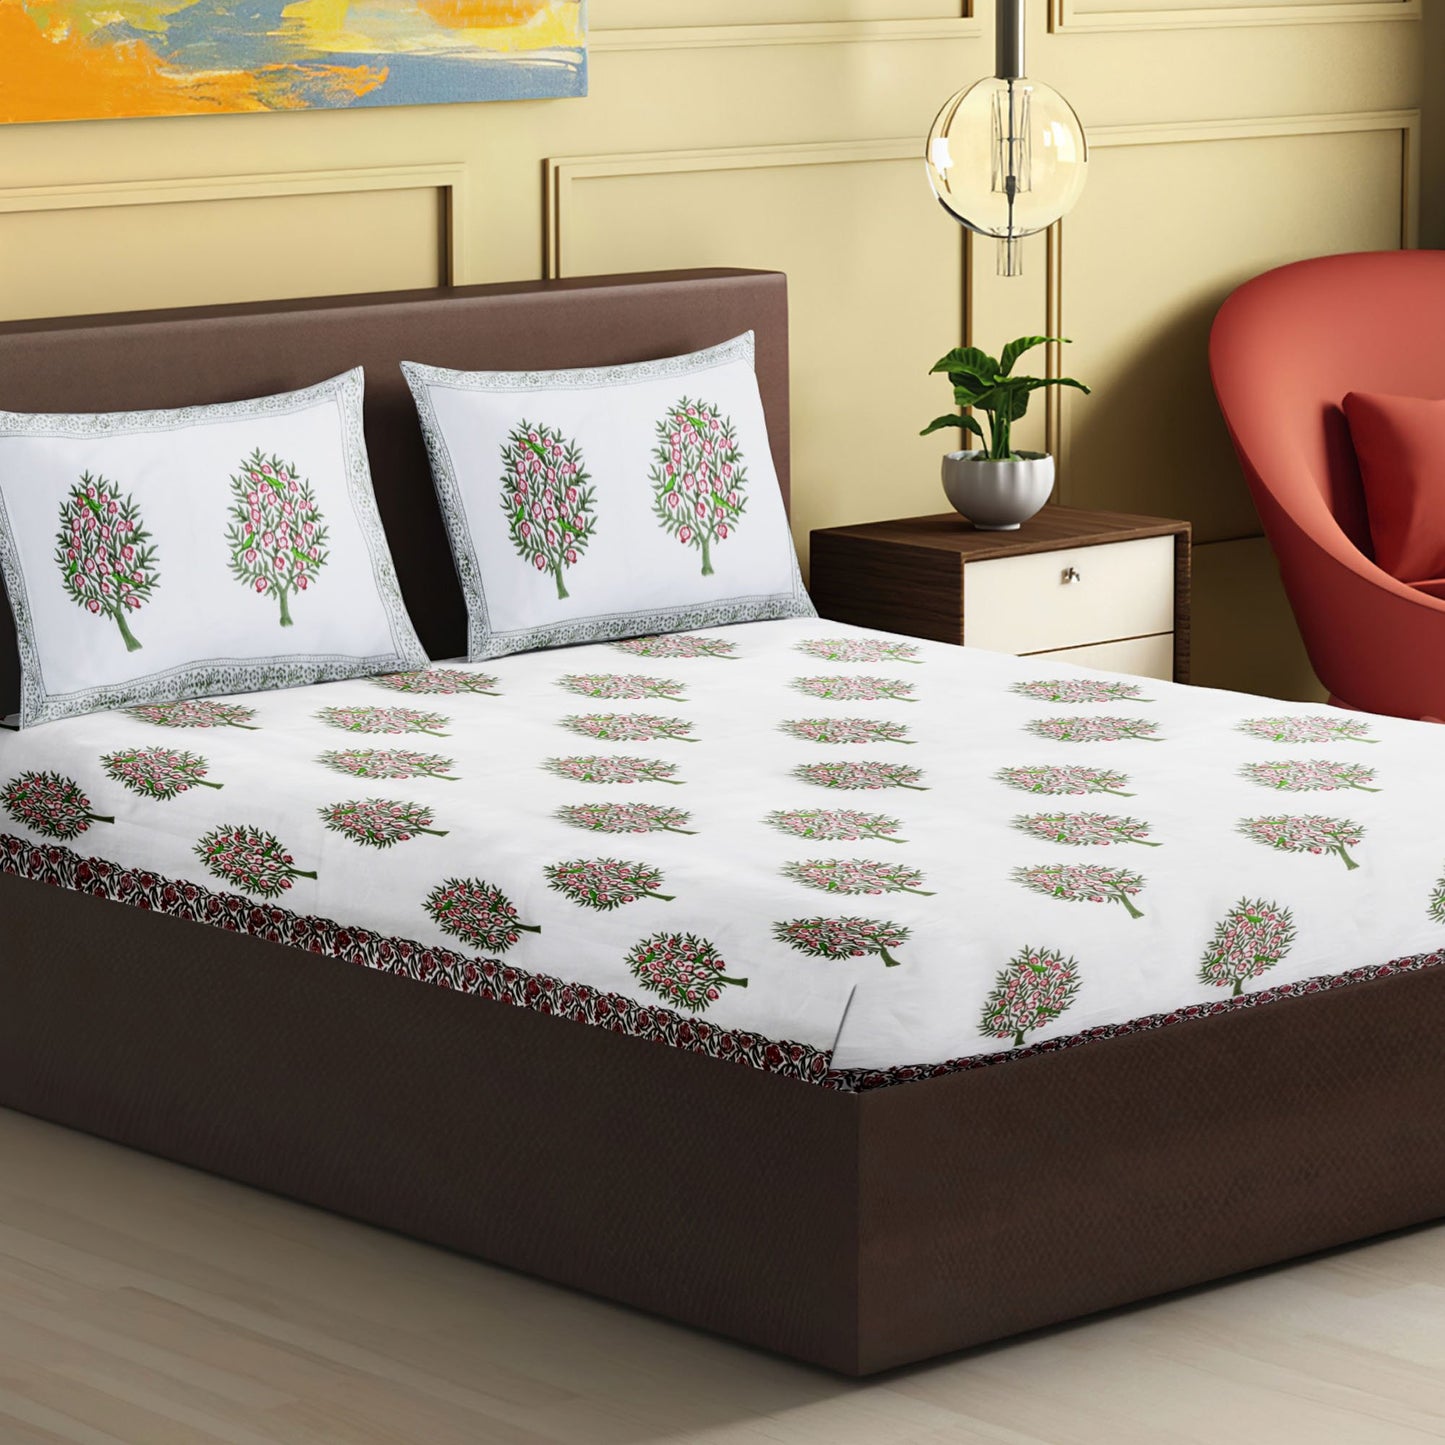 Nakshi 100% Handmade  Floral sanganeri Block Print King Size Bedsheets comes  with 2 Pillow covers.